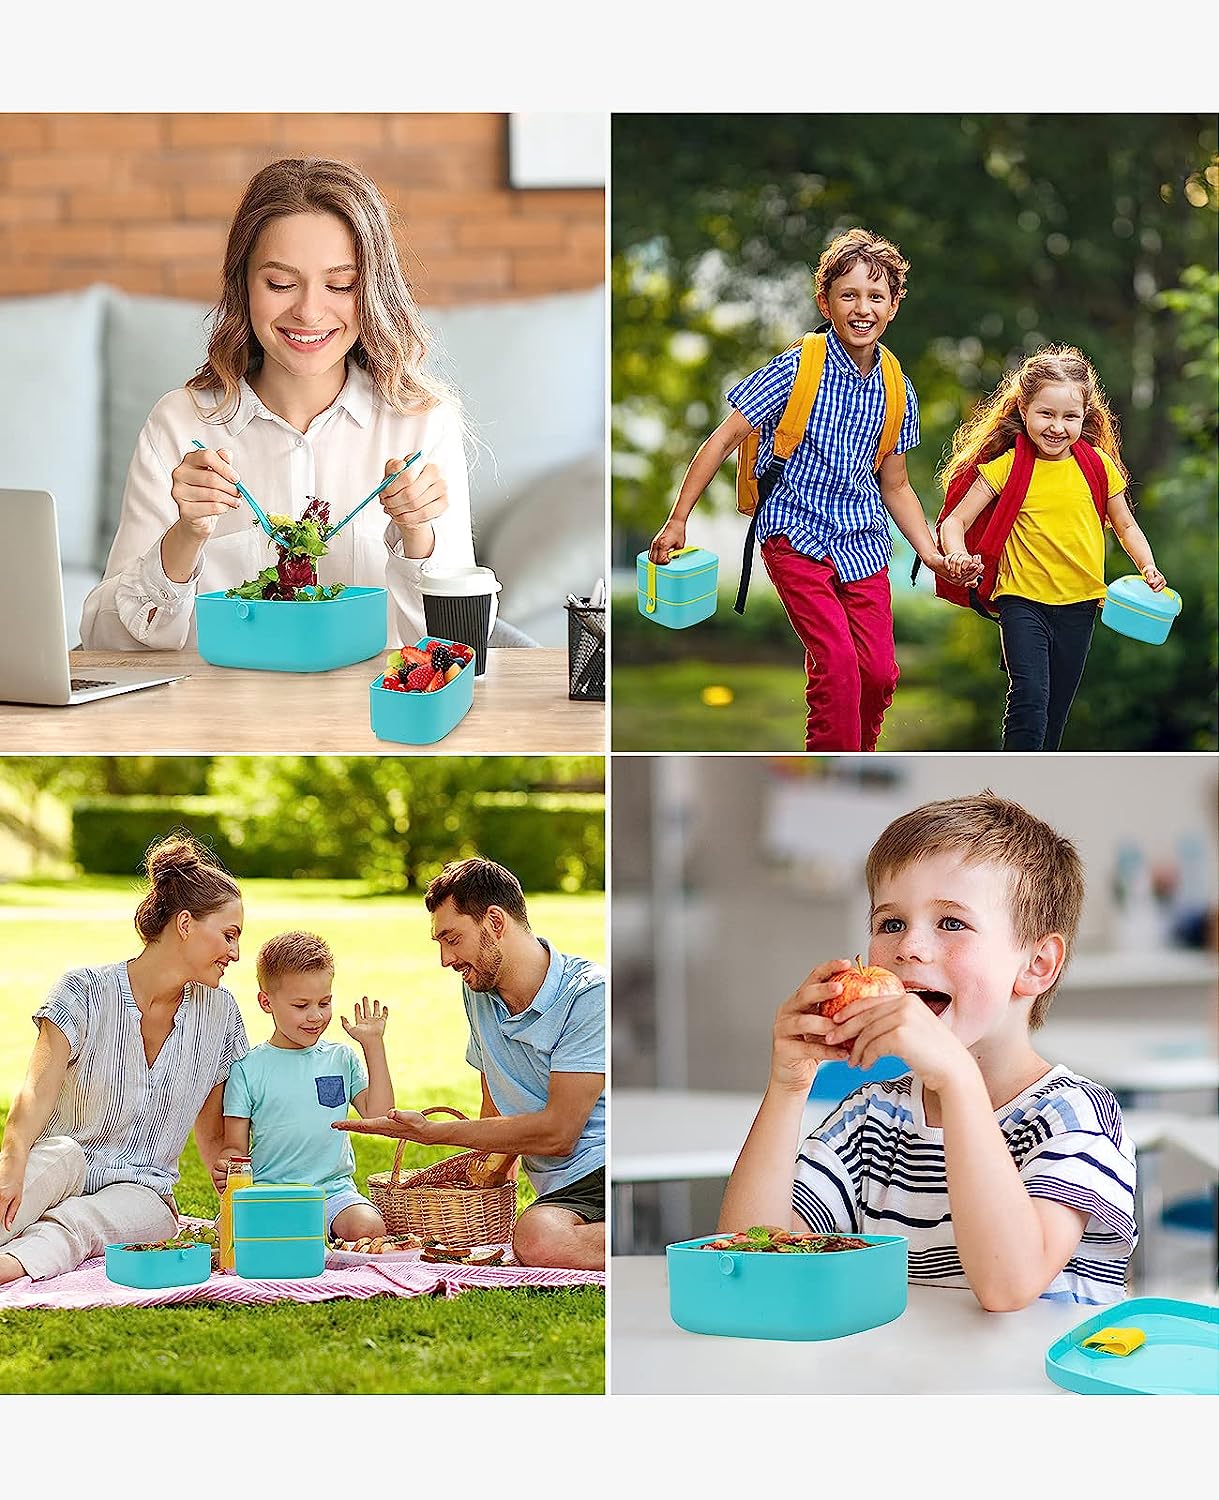 BPA-Free and Food Safe Bento Boxes Adults Lunch Box Kids Leak